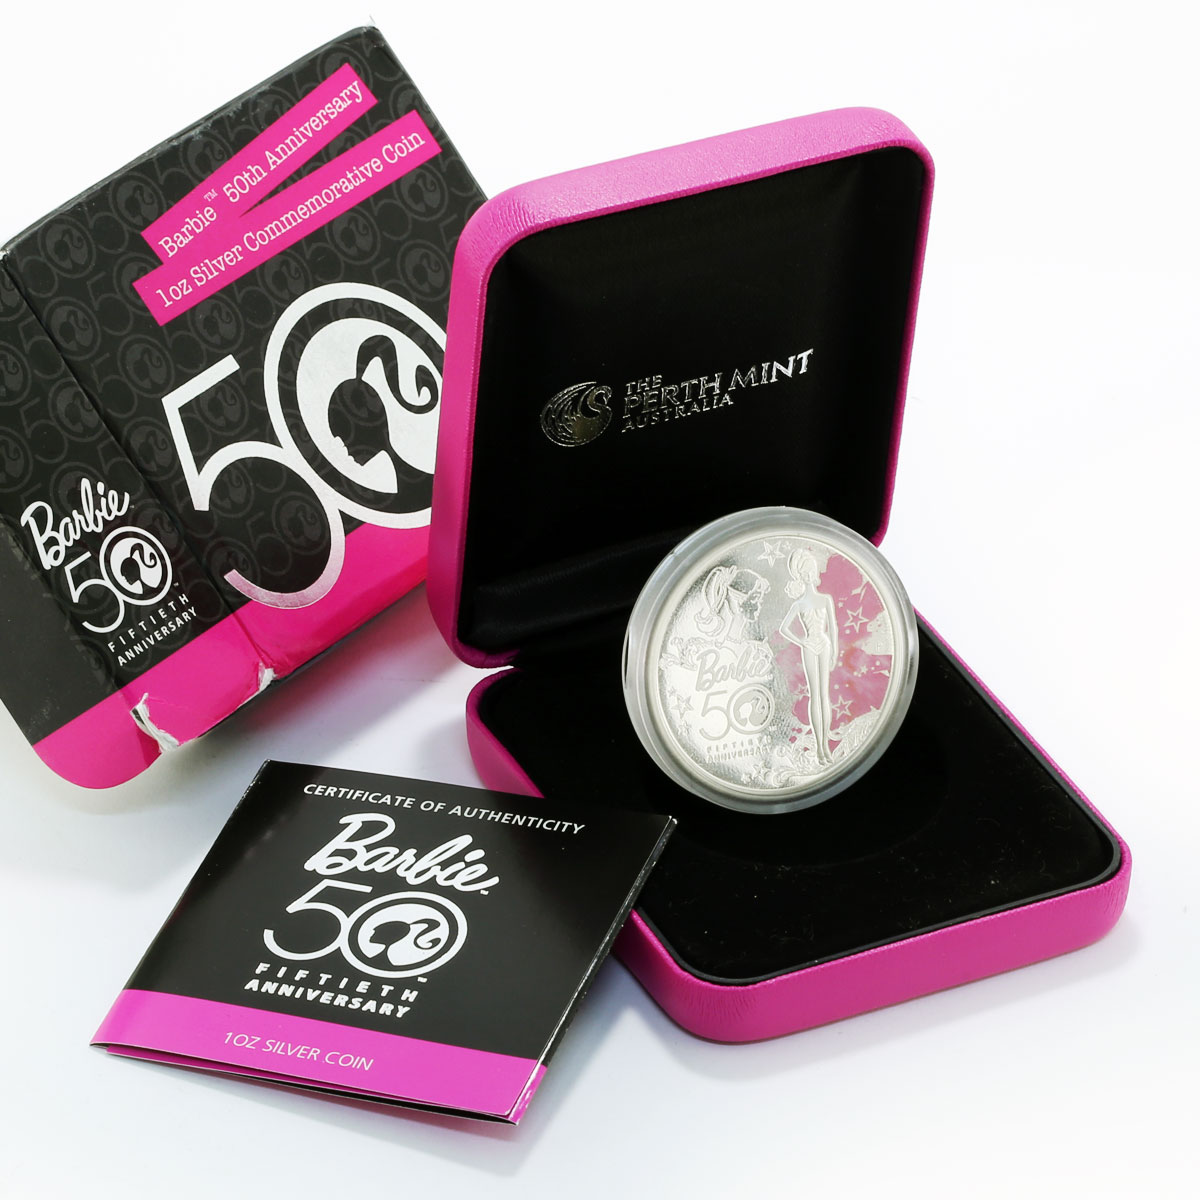 Tuvalu 1 dollar 50th Anniversary of Barbie silver coin 2009